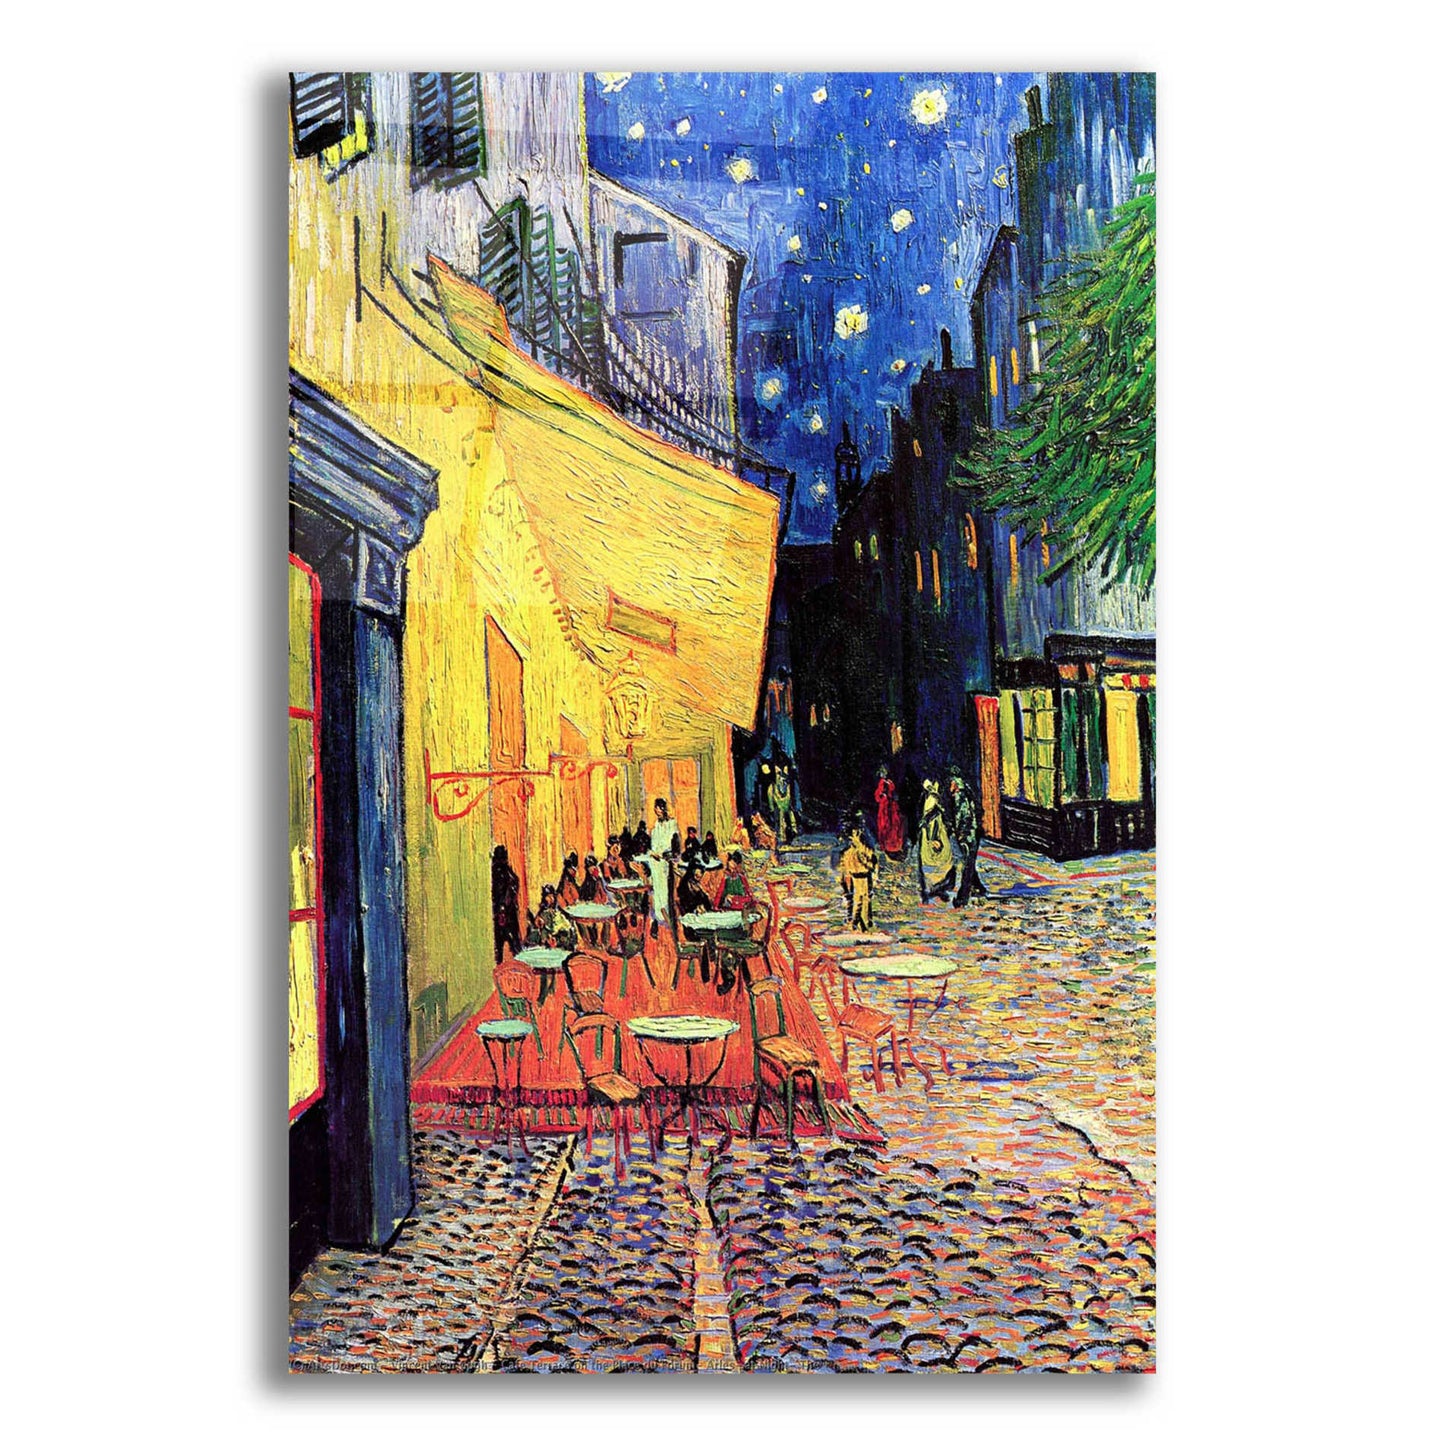 Epic Art 'Cafe Terrace at Night' by Vincent van Gogh, Acrylic Glass Wall Art,12x16x1.1x0,20x24x1.1x0,26x30x1.74x0,40x54x1.74x0